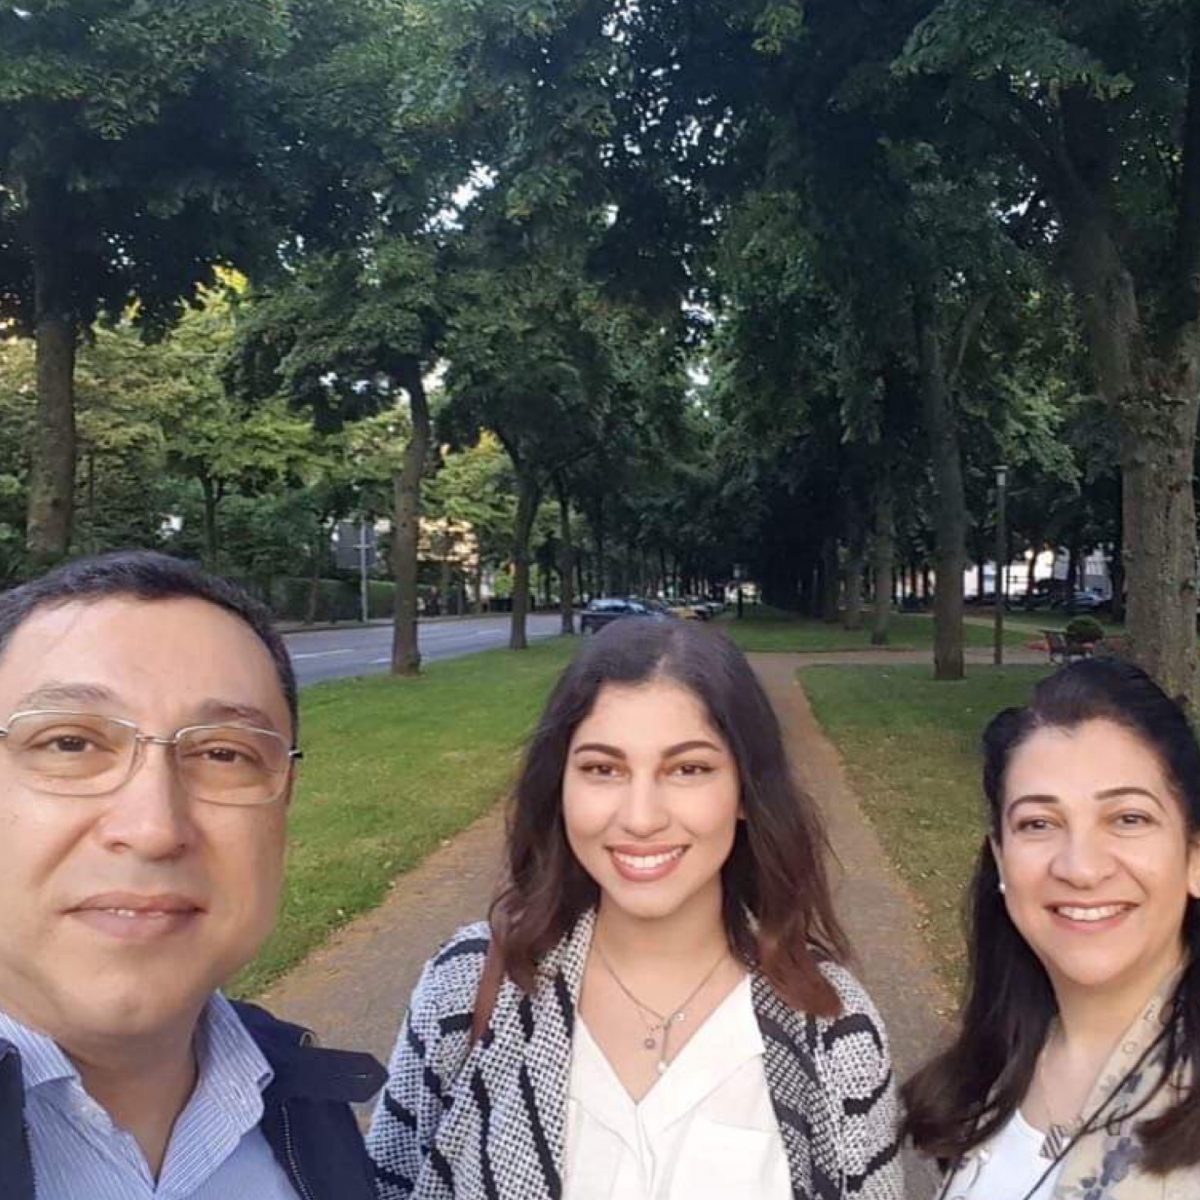 TUM Research Alumni Inas Abdelaziz and Hossam Sherif with their daughter.